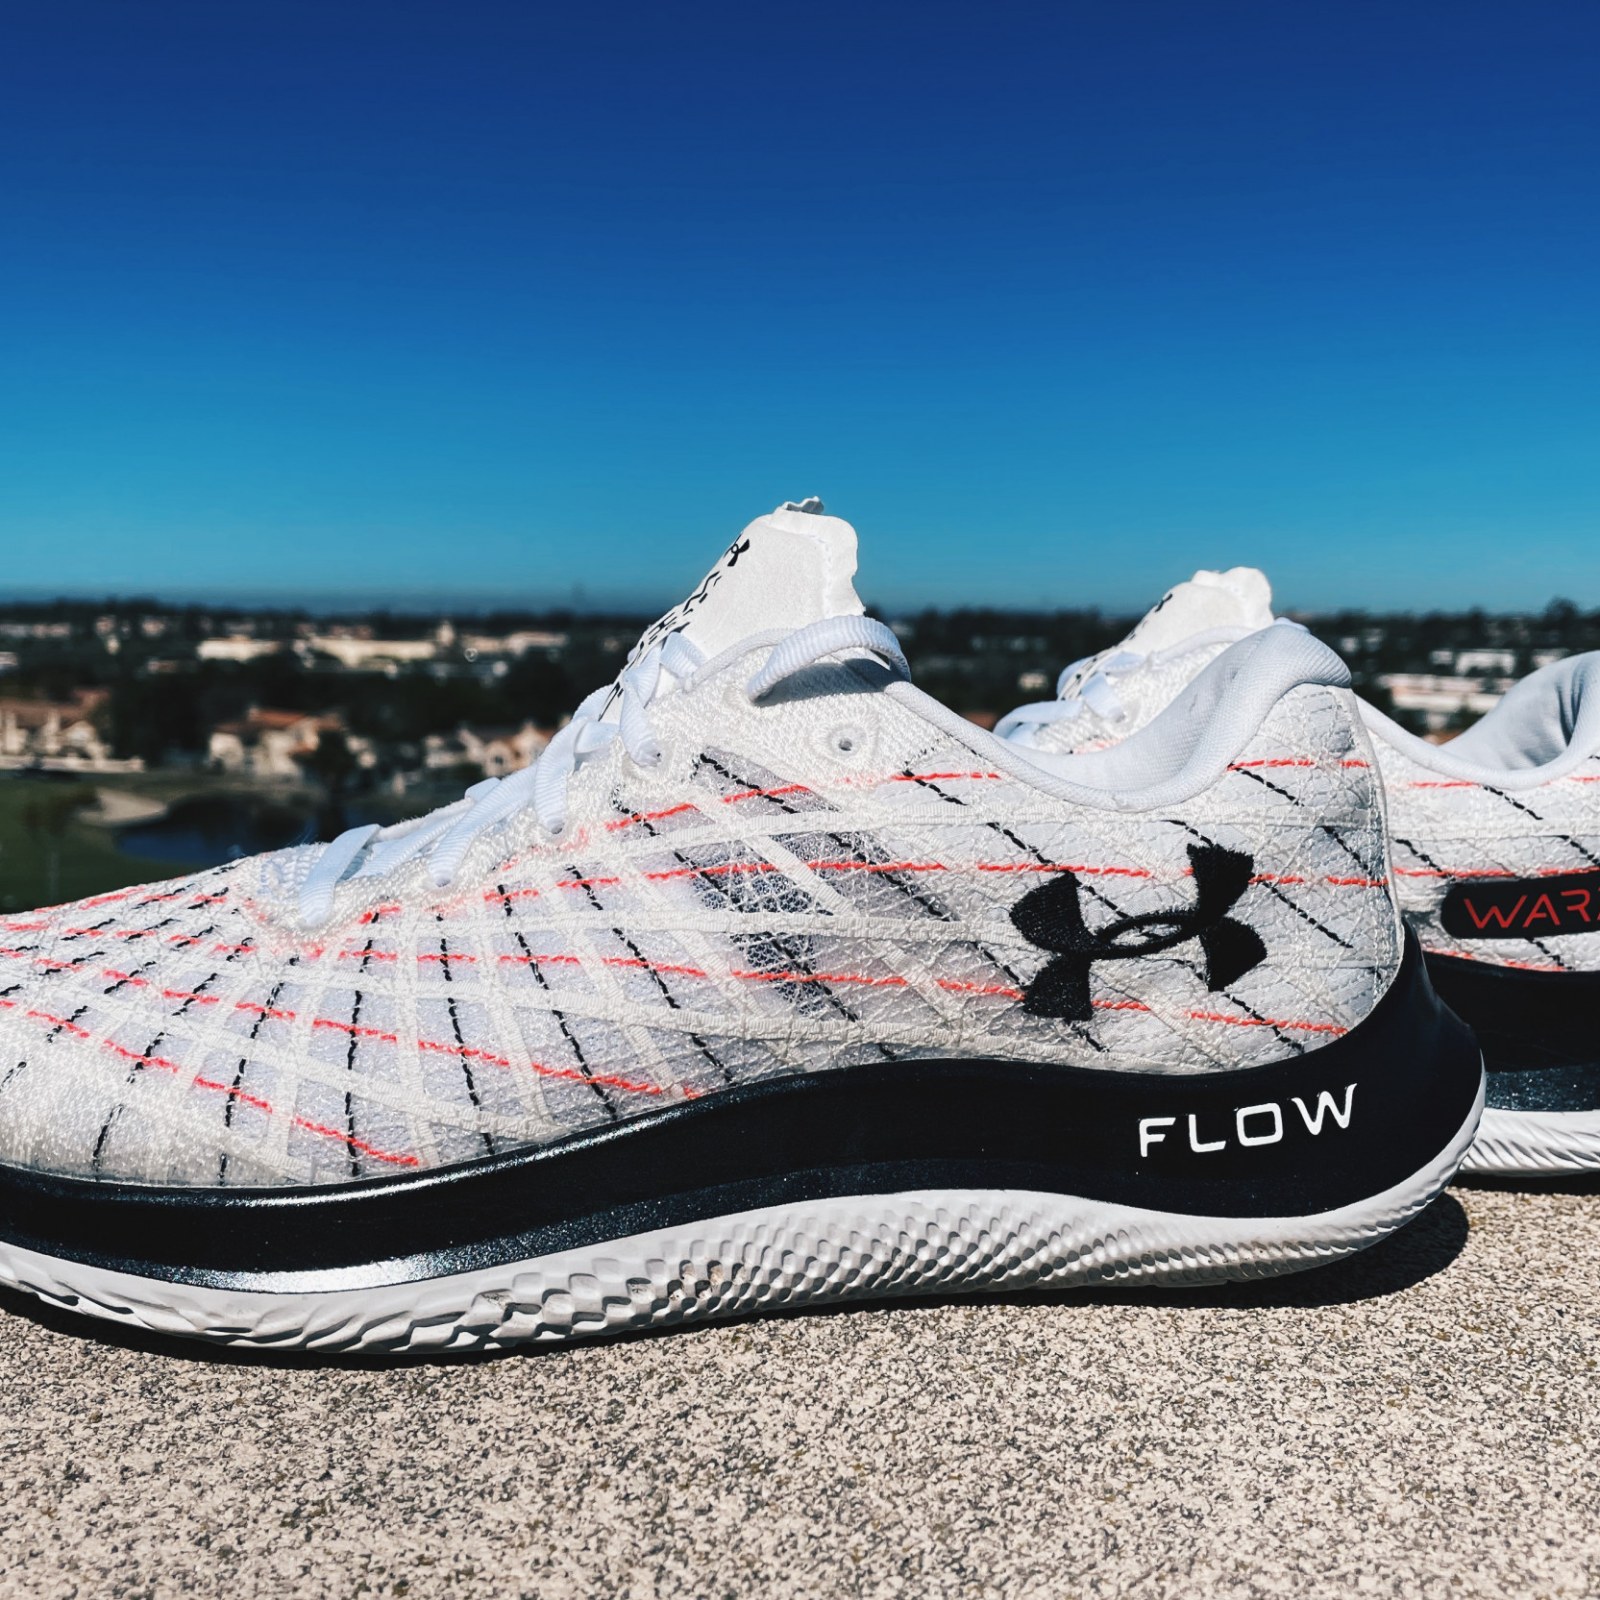 UA Flow Velociti Wind Review: Running Shoes That Are Both Smart